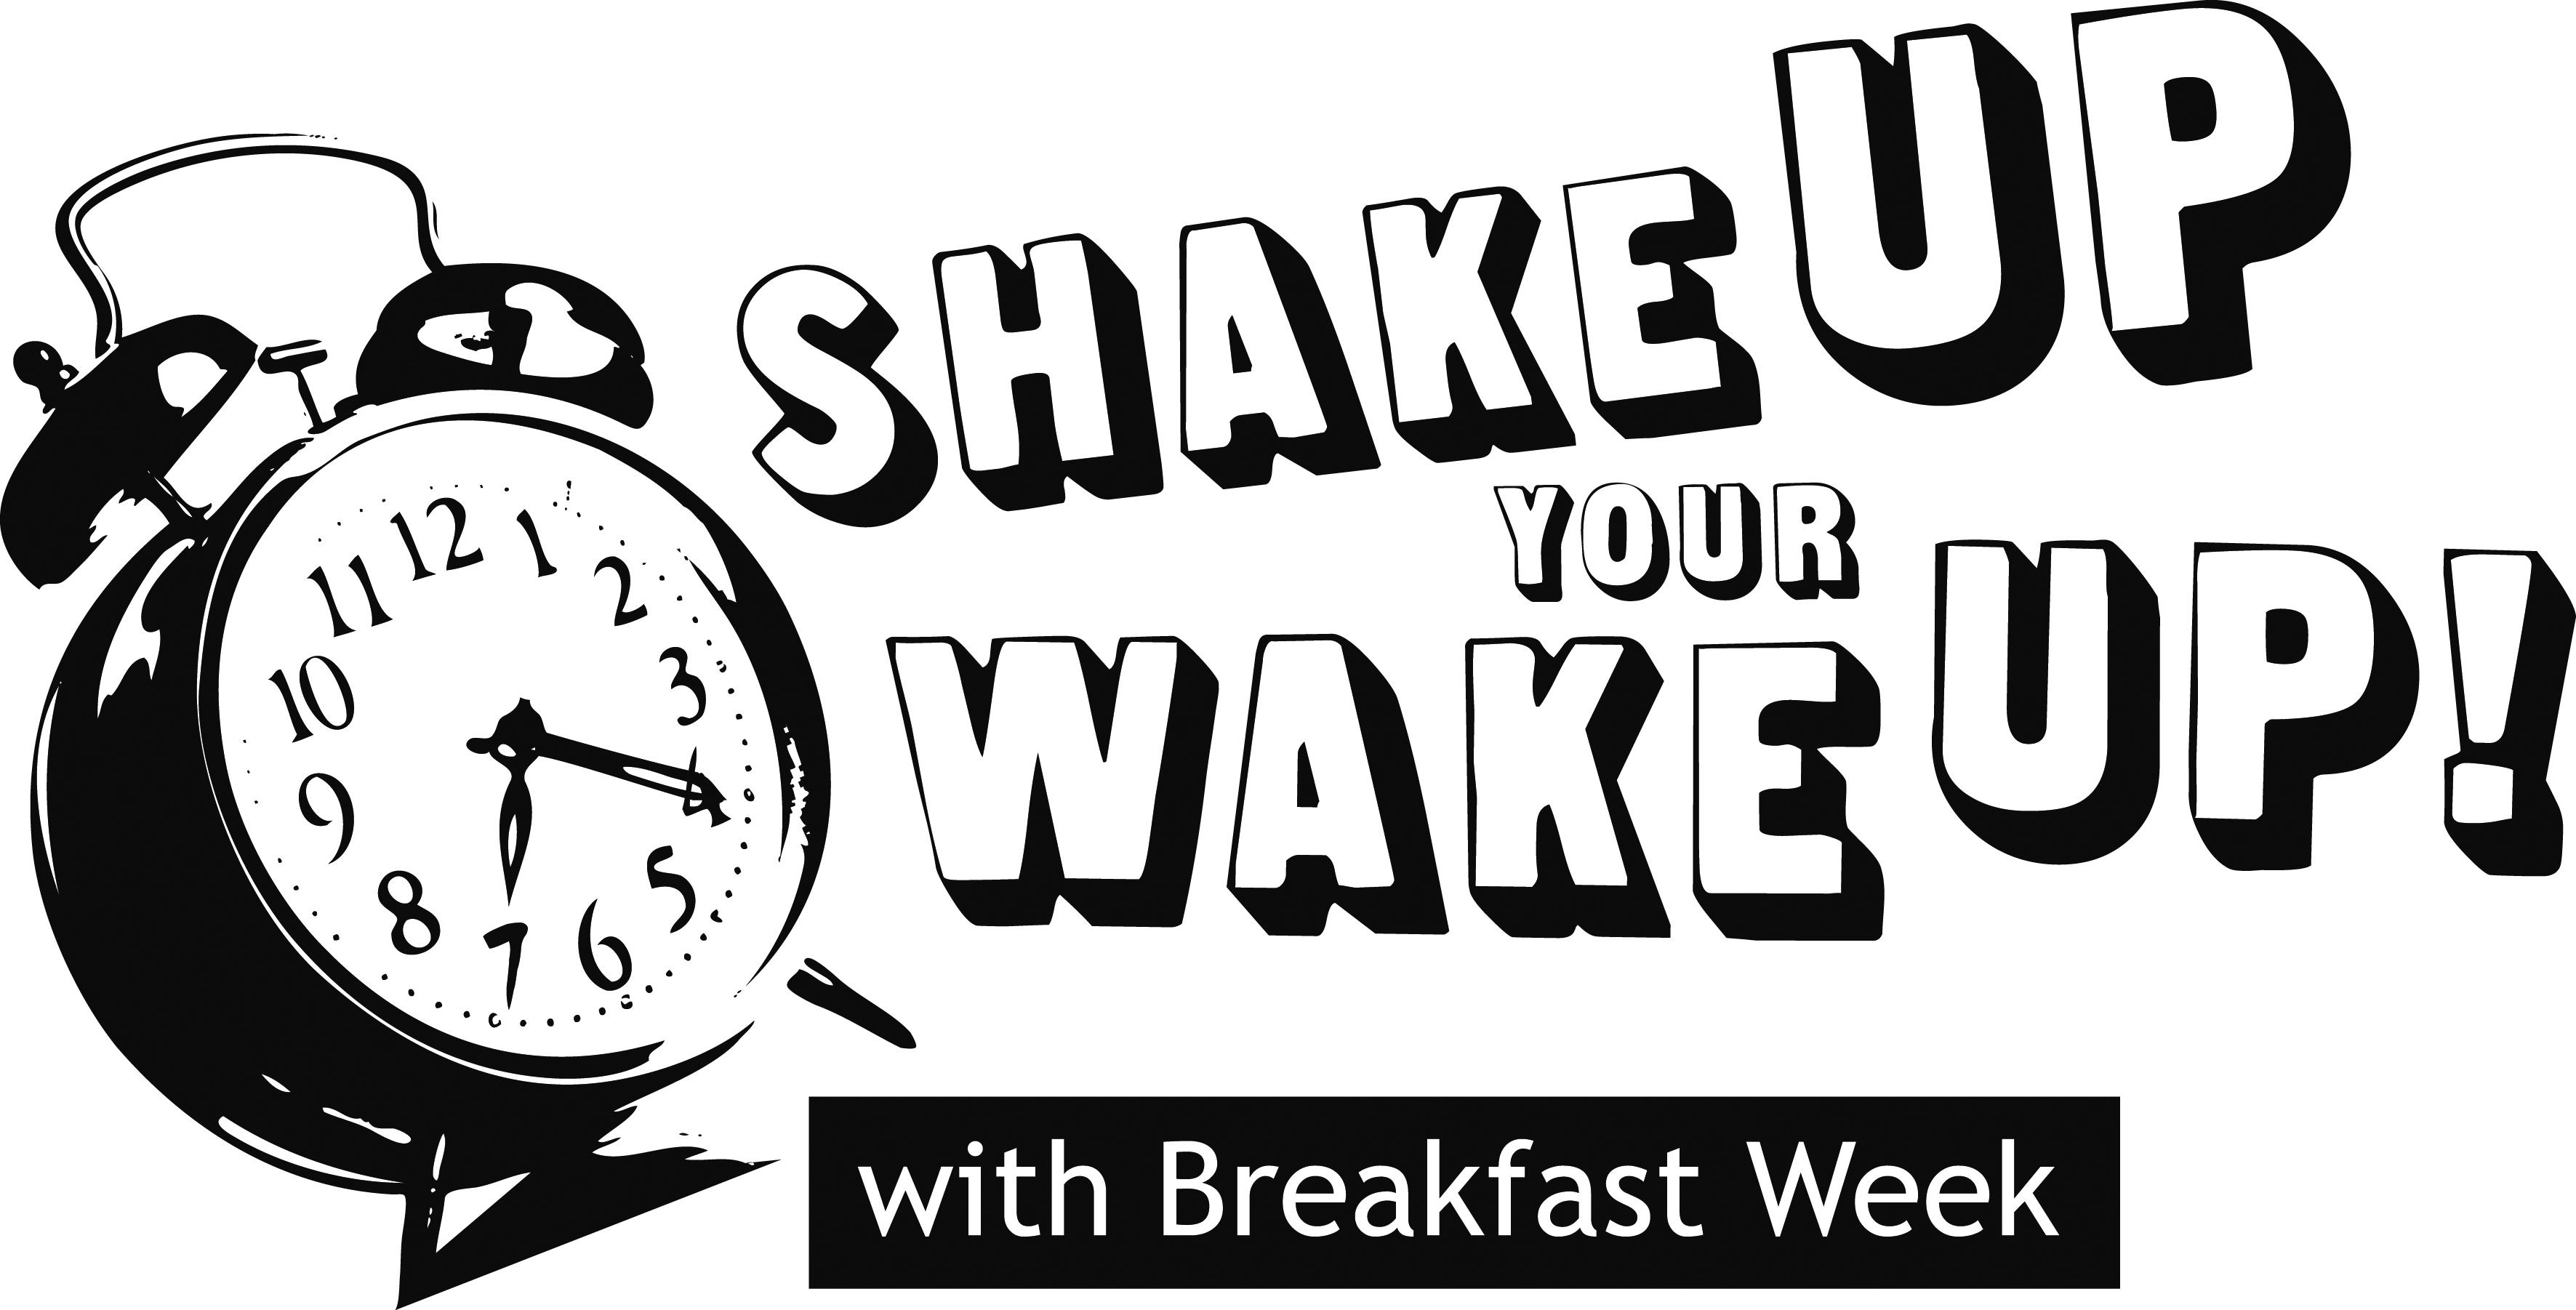 Perfekt for... Shaking up your wake up during Breakfast Week (25-31 January)